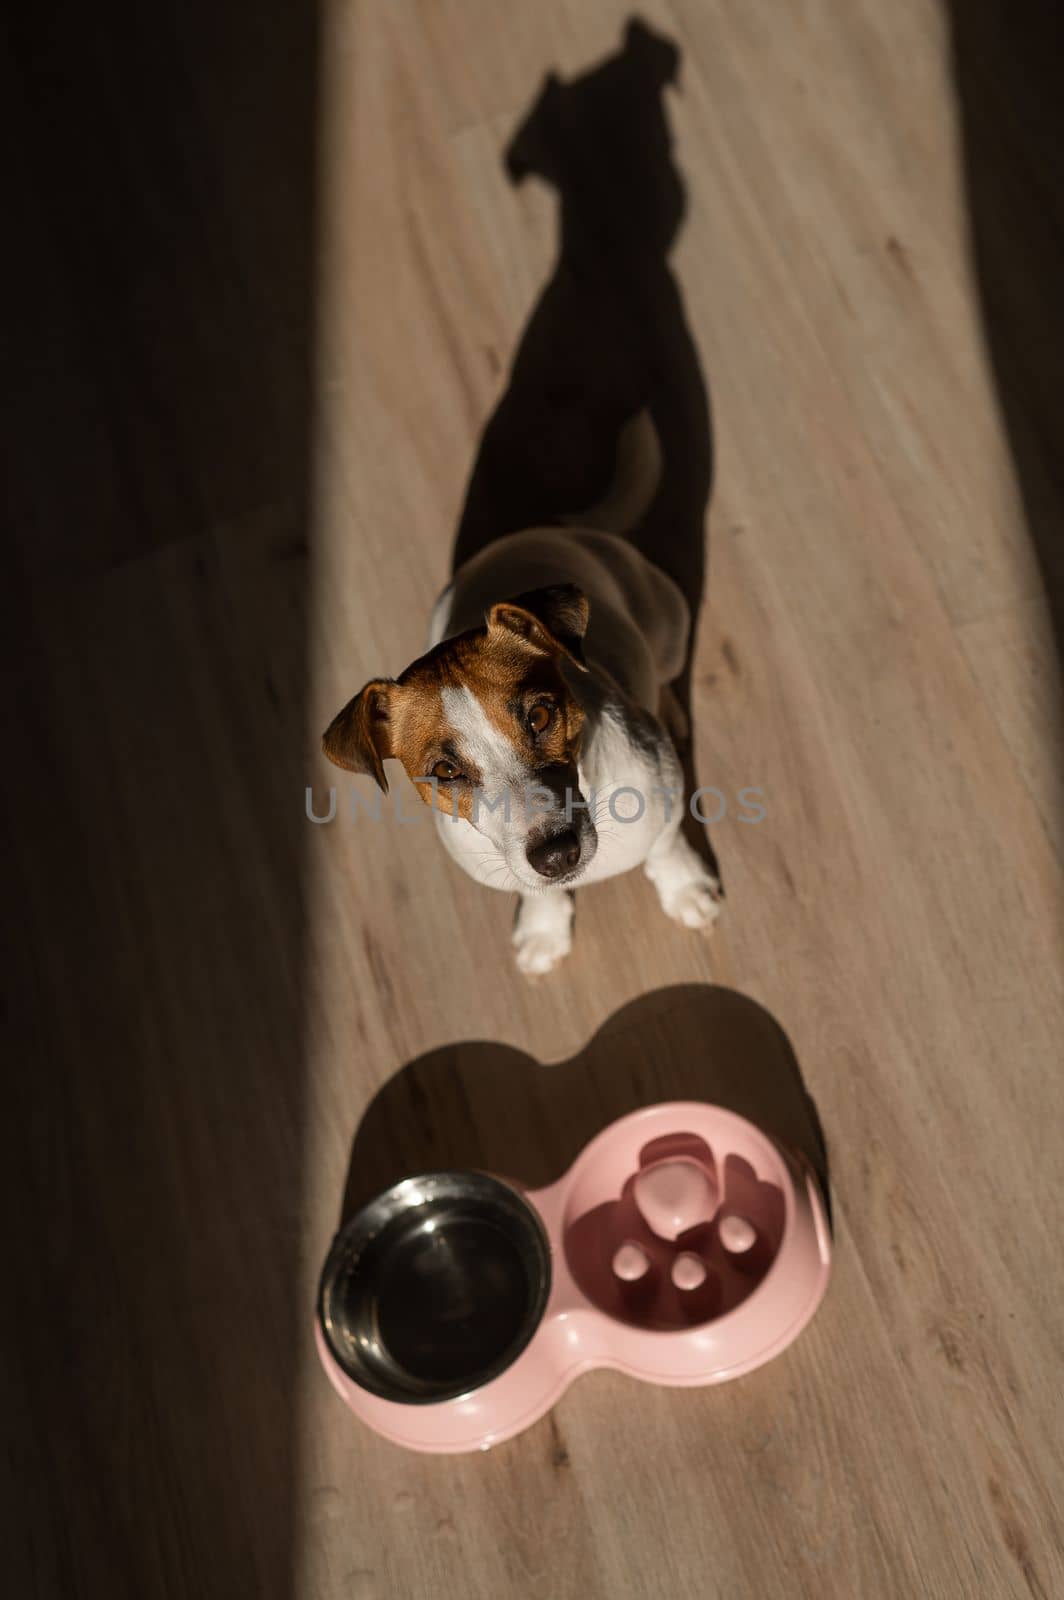 A double bowl for slow feeding and a bowl of water for the dog. Top view of a jack russell terrier dog near a pink plate with dry food on a wooden floor. by mrwed54